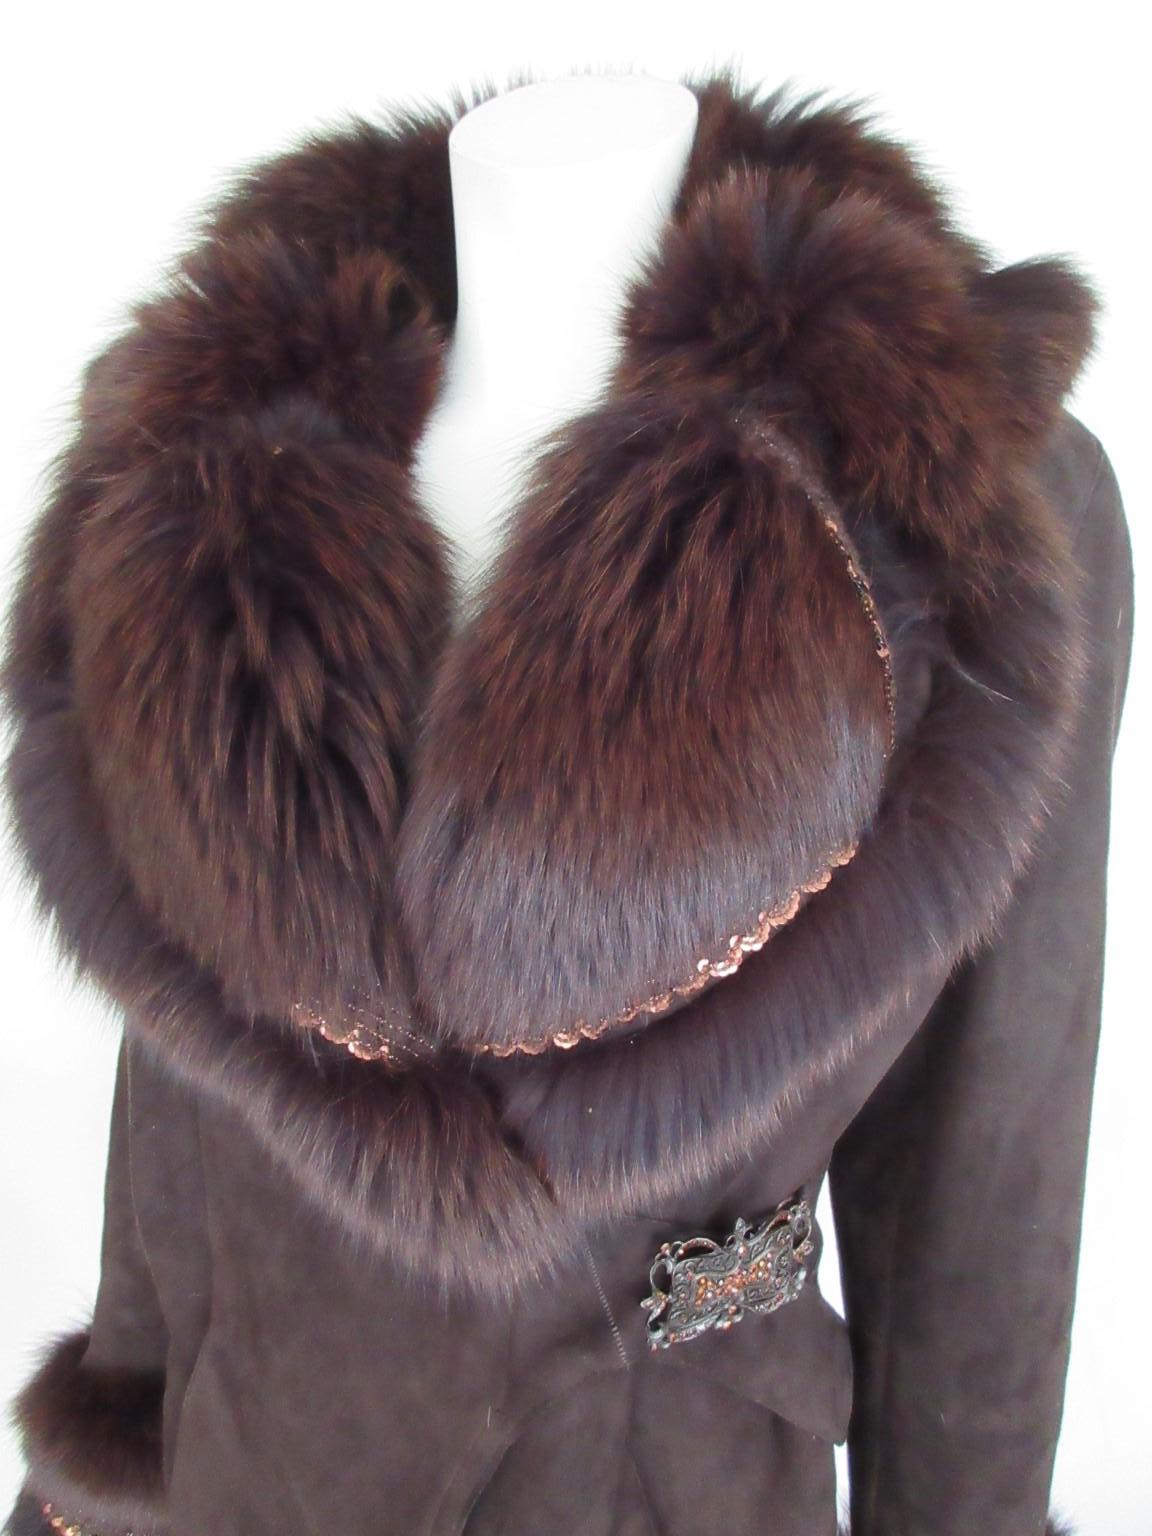 This jacket is made of soft brown tuscany lamb shearling with fox fur

We offer more exclusive fur 
/winter items, view our frontstore.

Details:
Made of brown soft quality shearling
with soft brown fox fur
embroidered with bronze color sequins
2